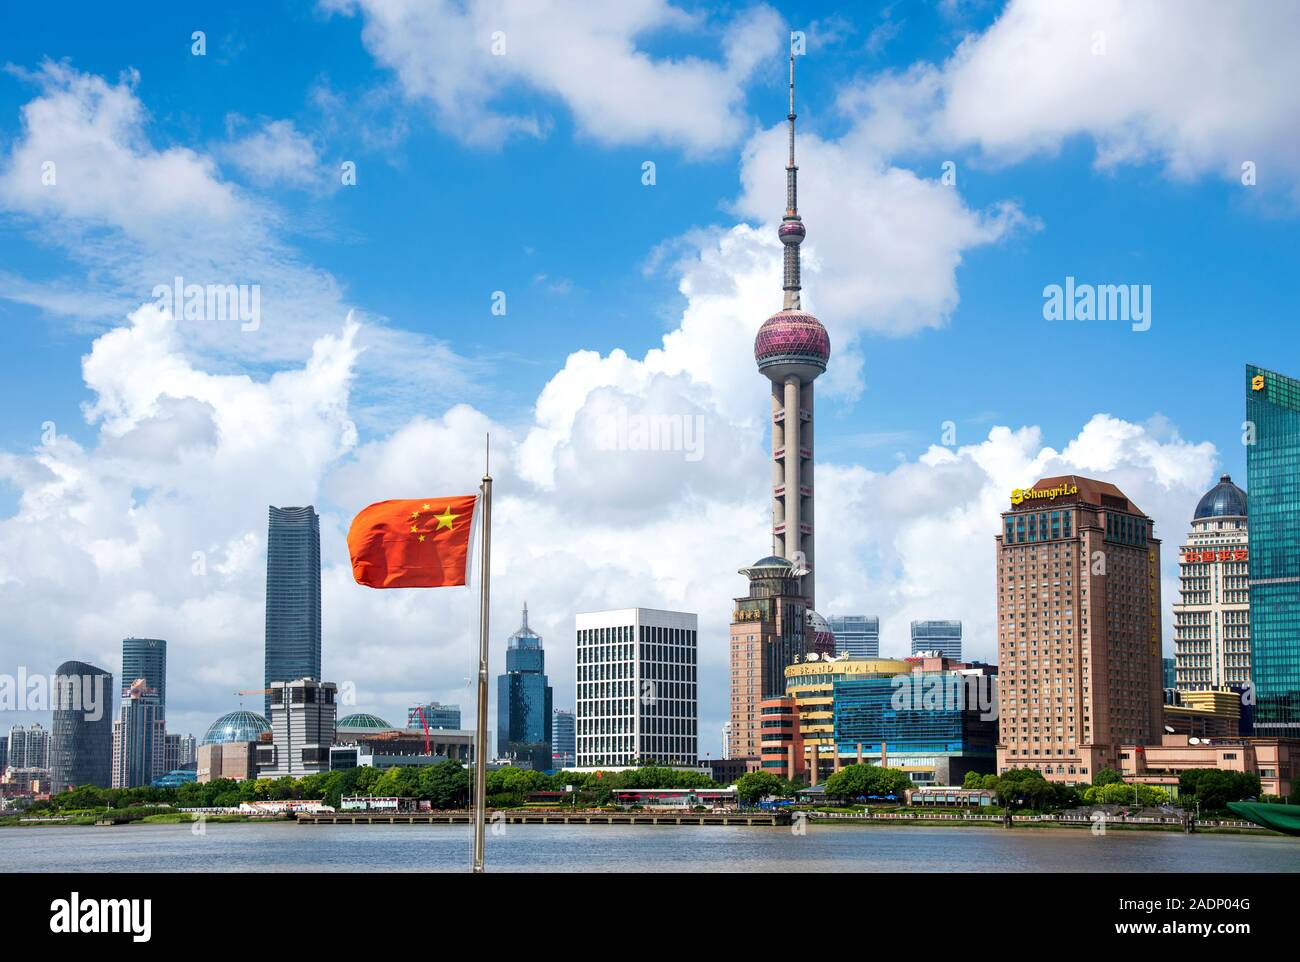 Shanghai, China - August 8, 2019: Shanghai modern downtown area with skyscrapers in Chinese metropolis at daytime Stock Photo